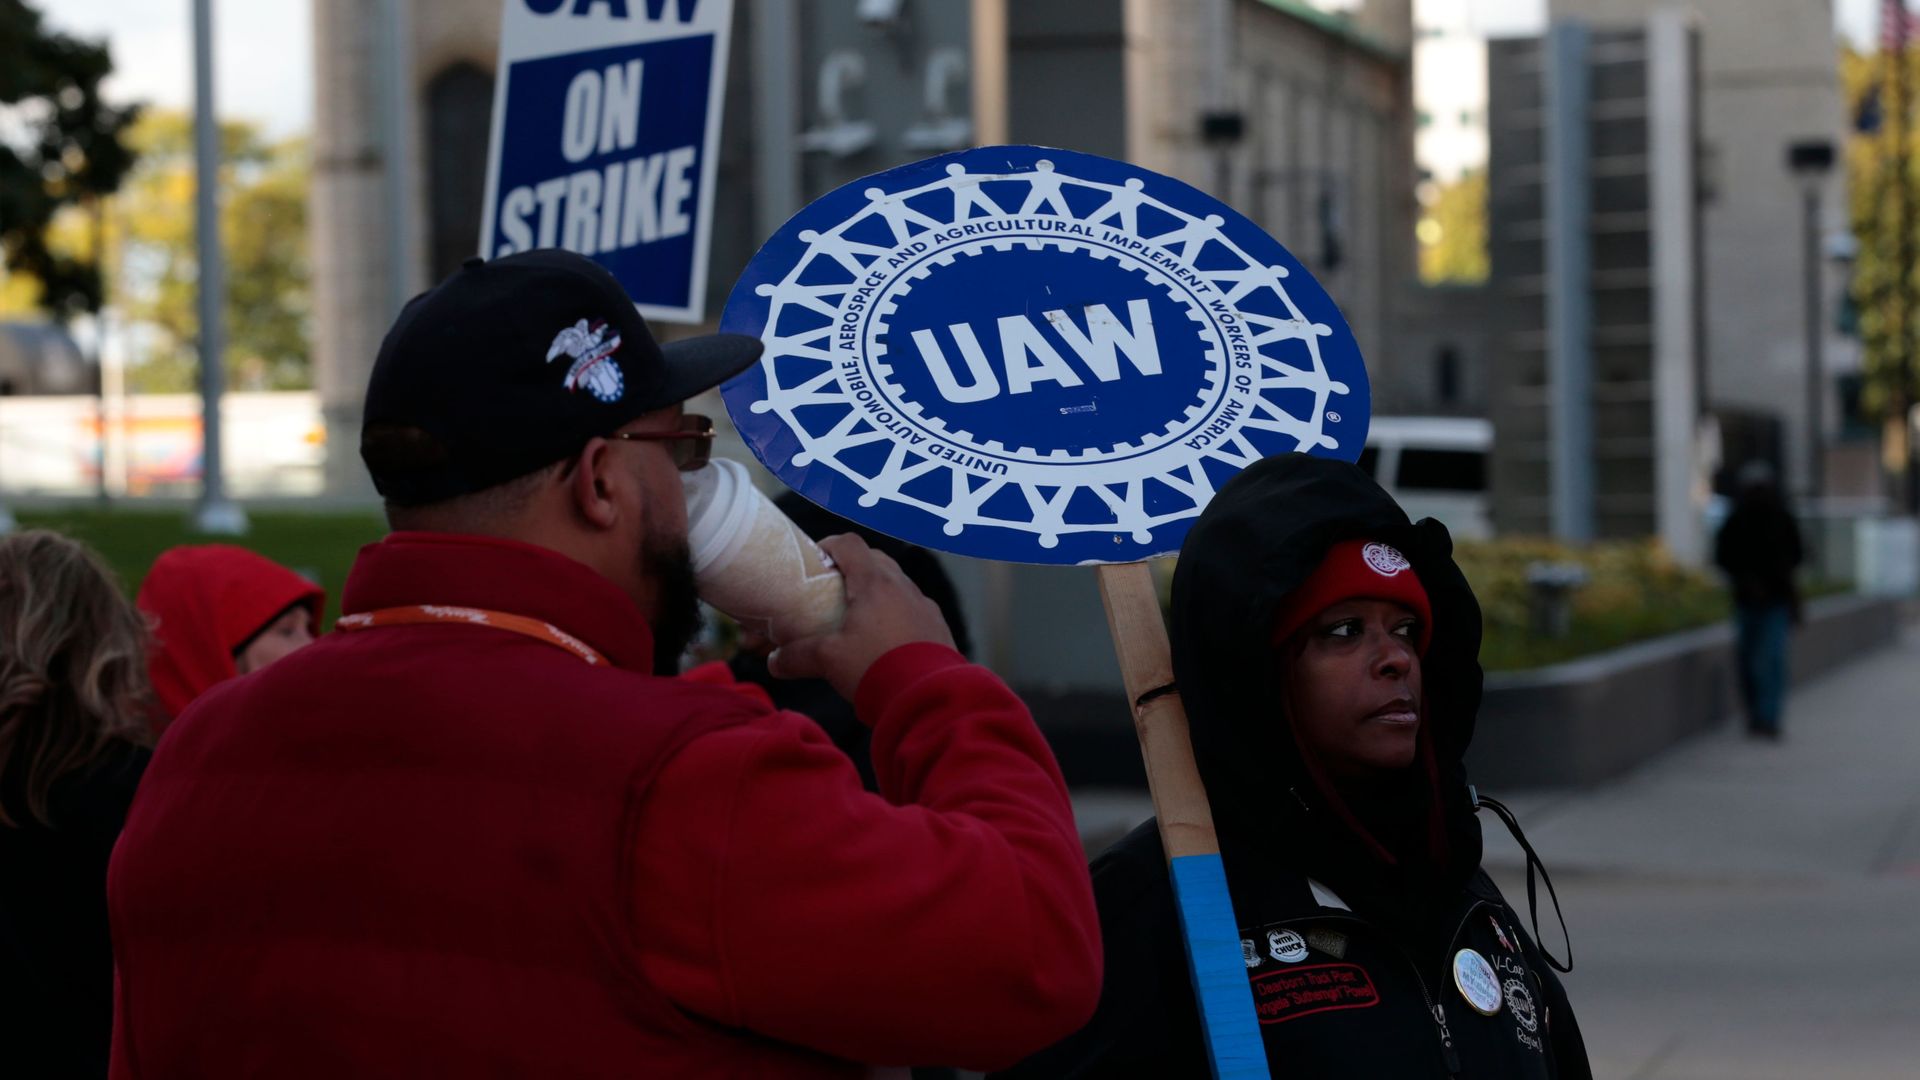 Members of the United Auto Workers picked outside of a building holding strike signs.